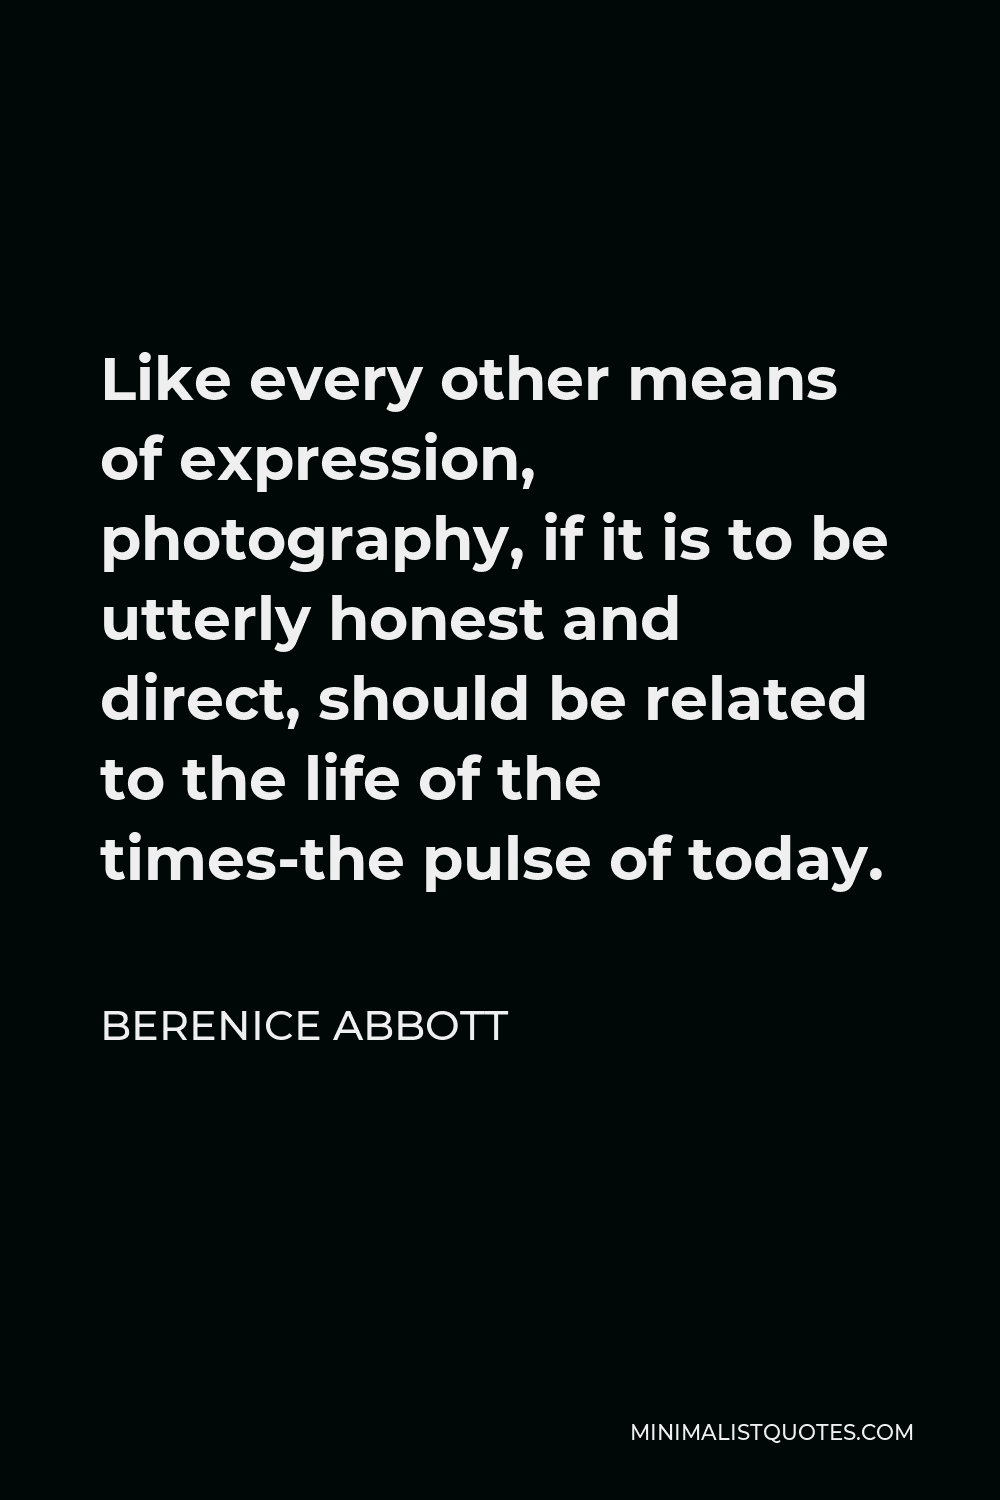 Berenice Abbott Quote - Like every other means of expression, photography, if it is to be utterly honest and direct, should be related to the life of the times-the pulse of today.